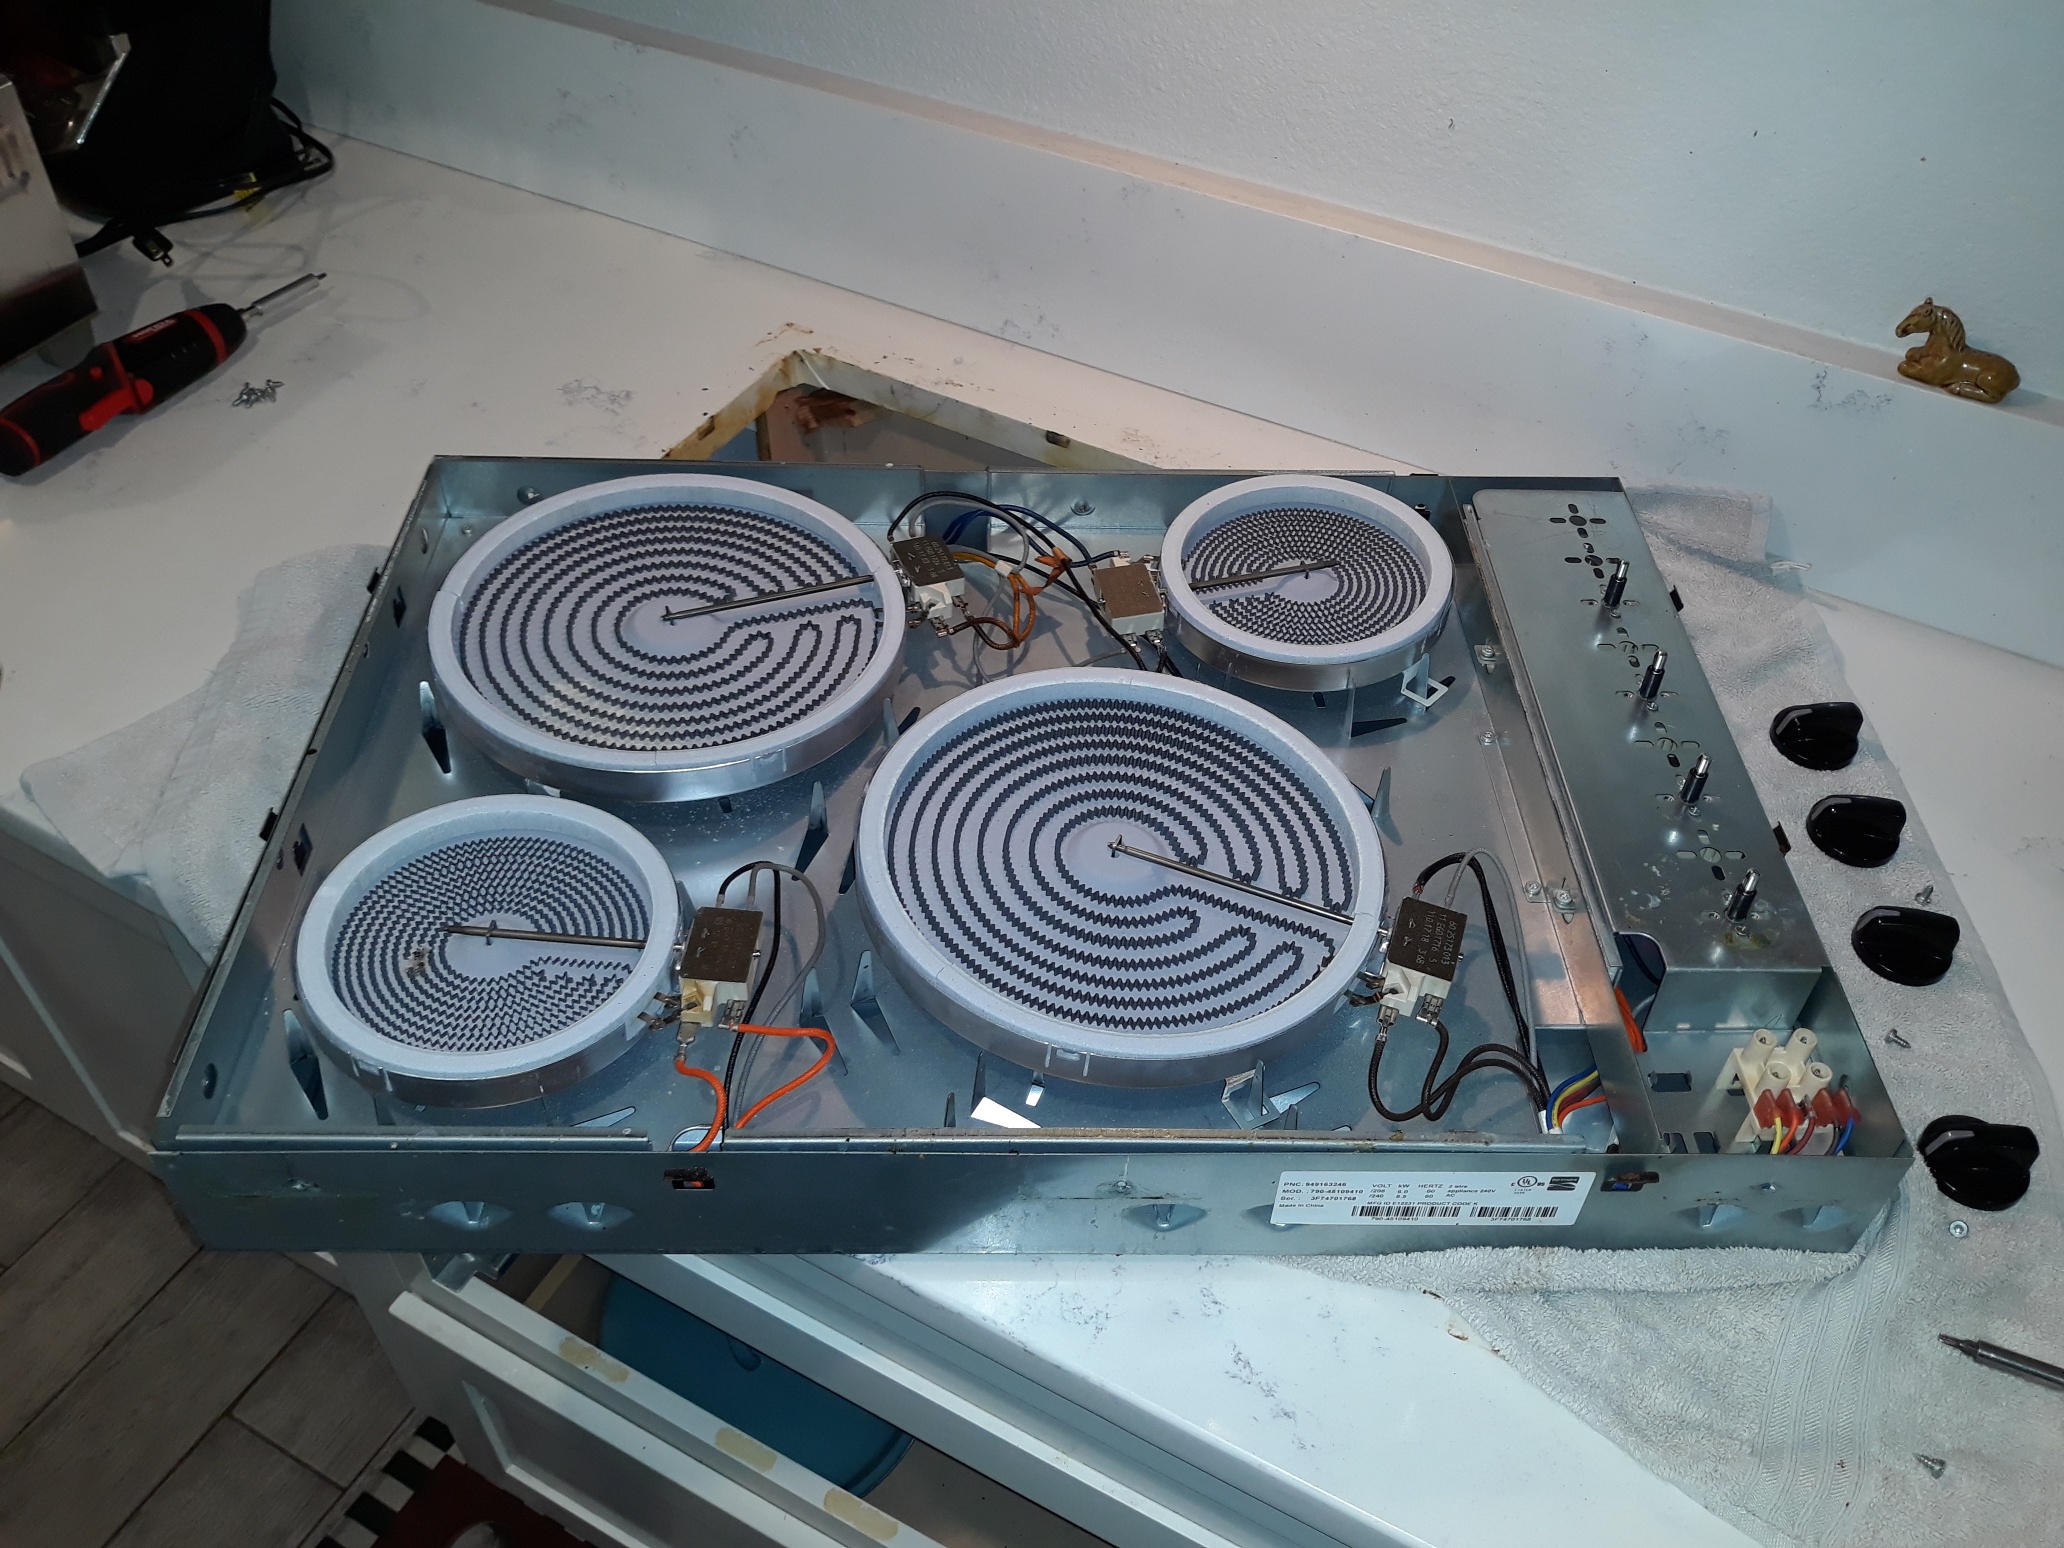 appliance repair cooktop repair repair require replacement of the failed heating element with a burned open coil co rd 535 sumterville fl 33585